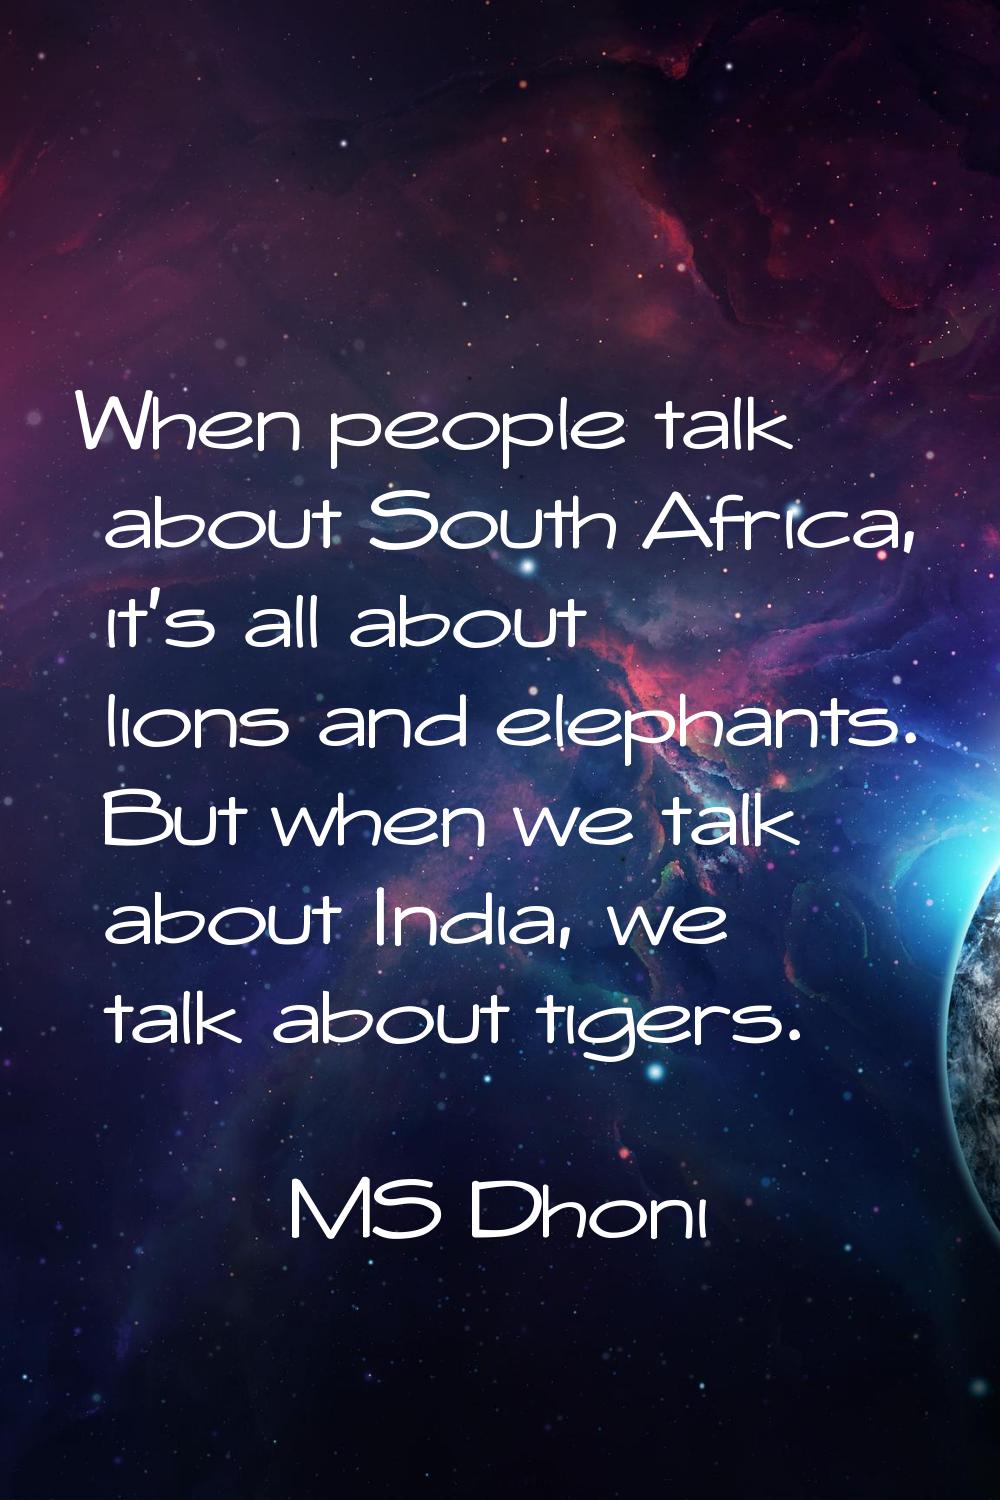 When people talk about South Africa, it's all about lions and elephants. But when we talk about Ind